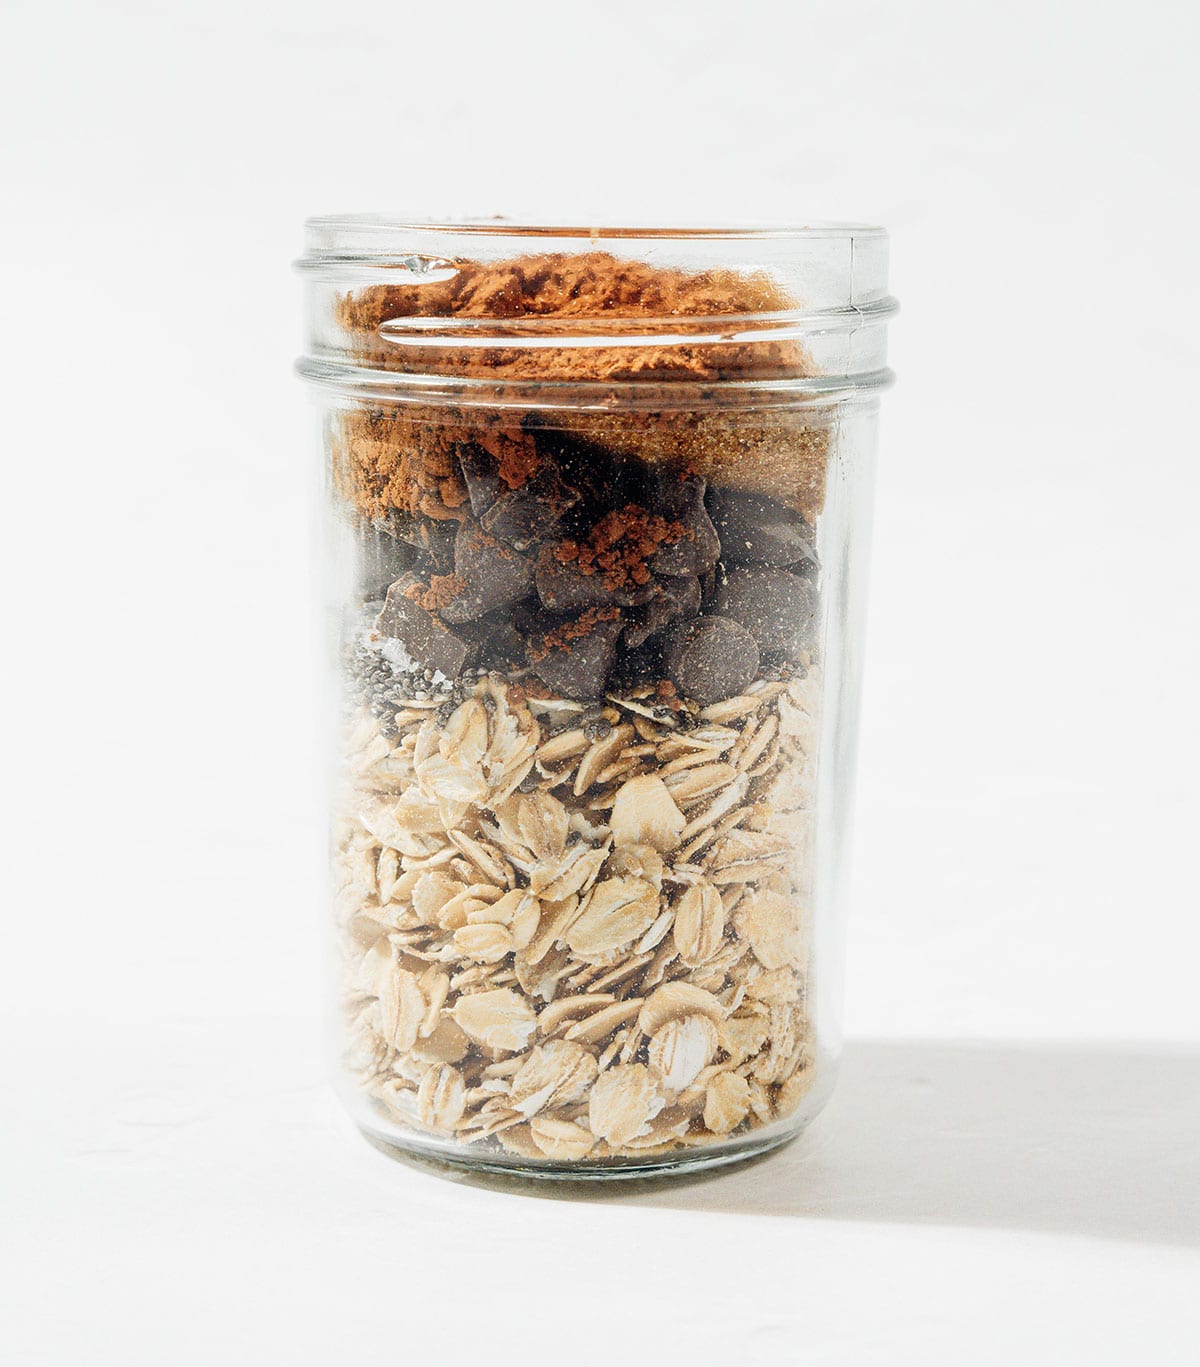 Ingredients for chocolate overnight oats in a jar.